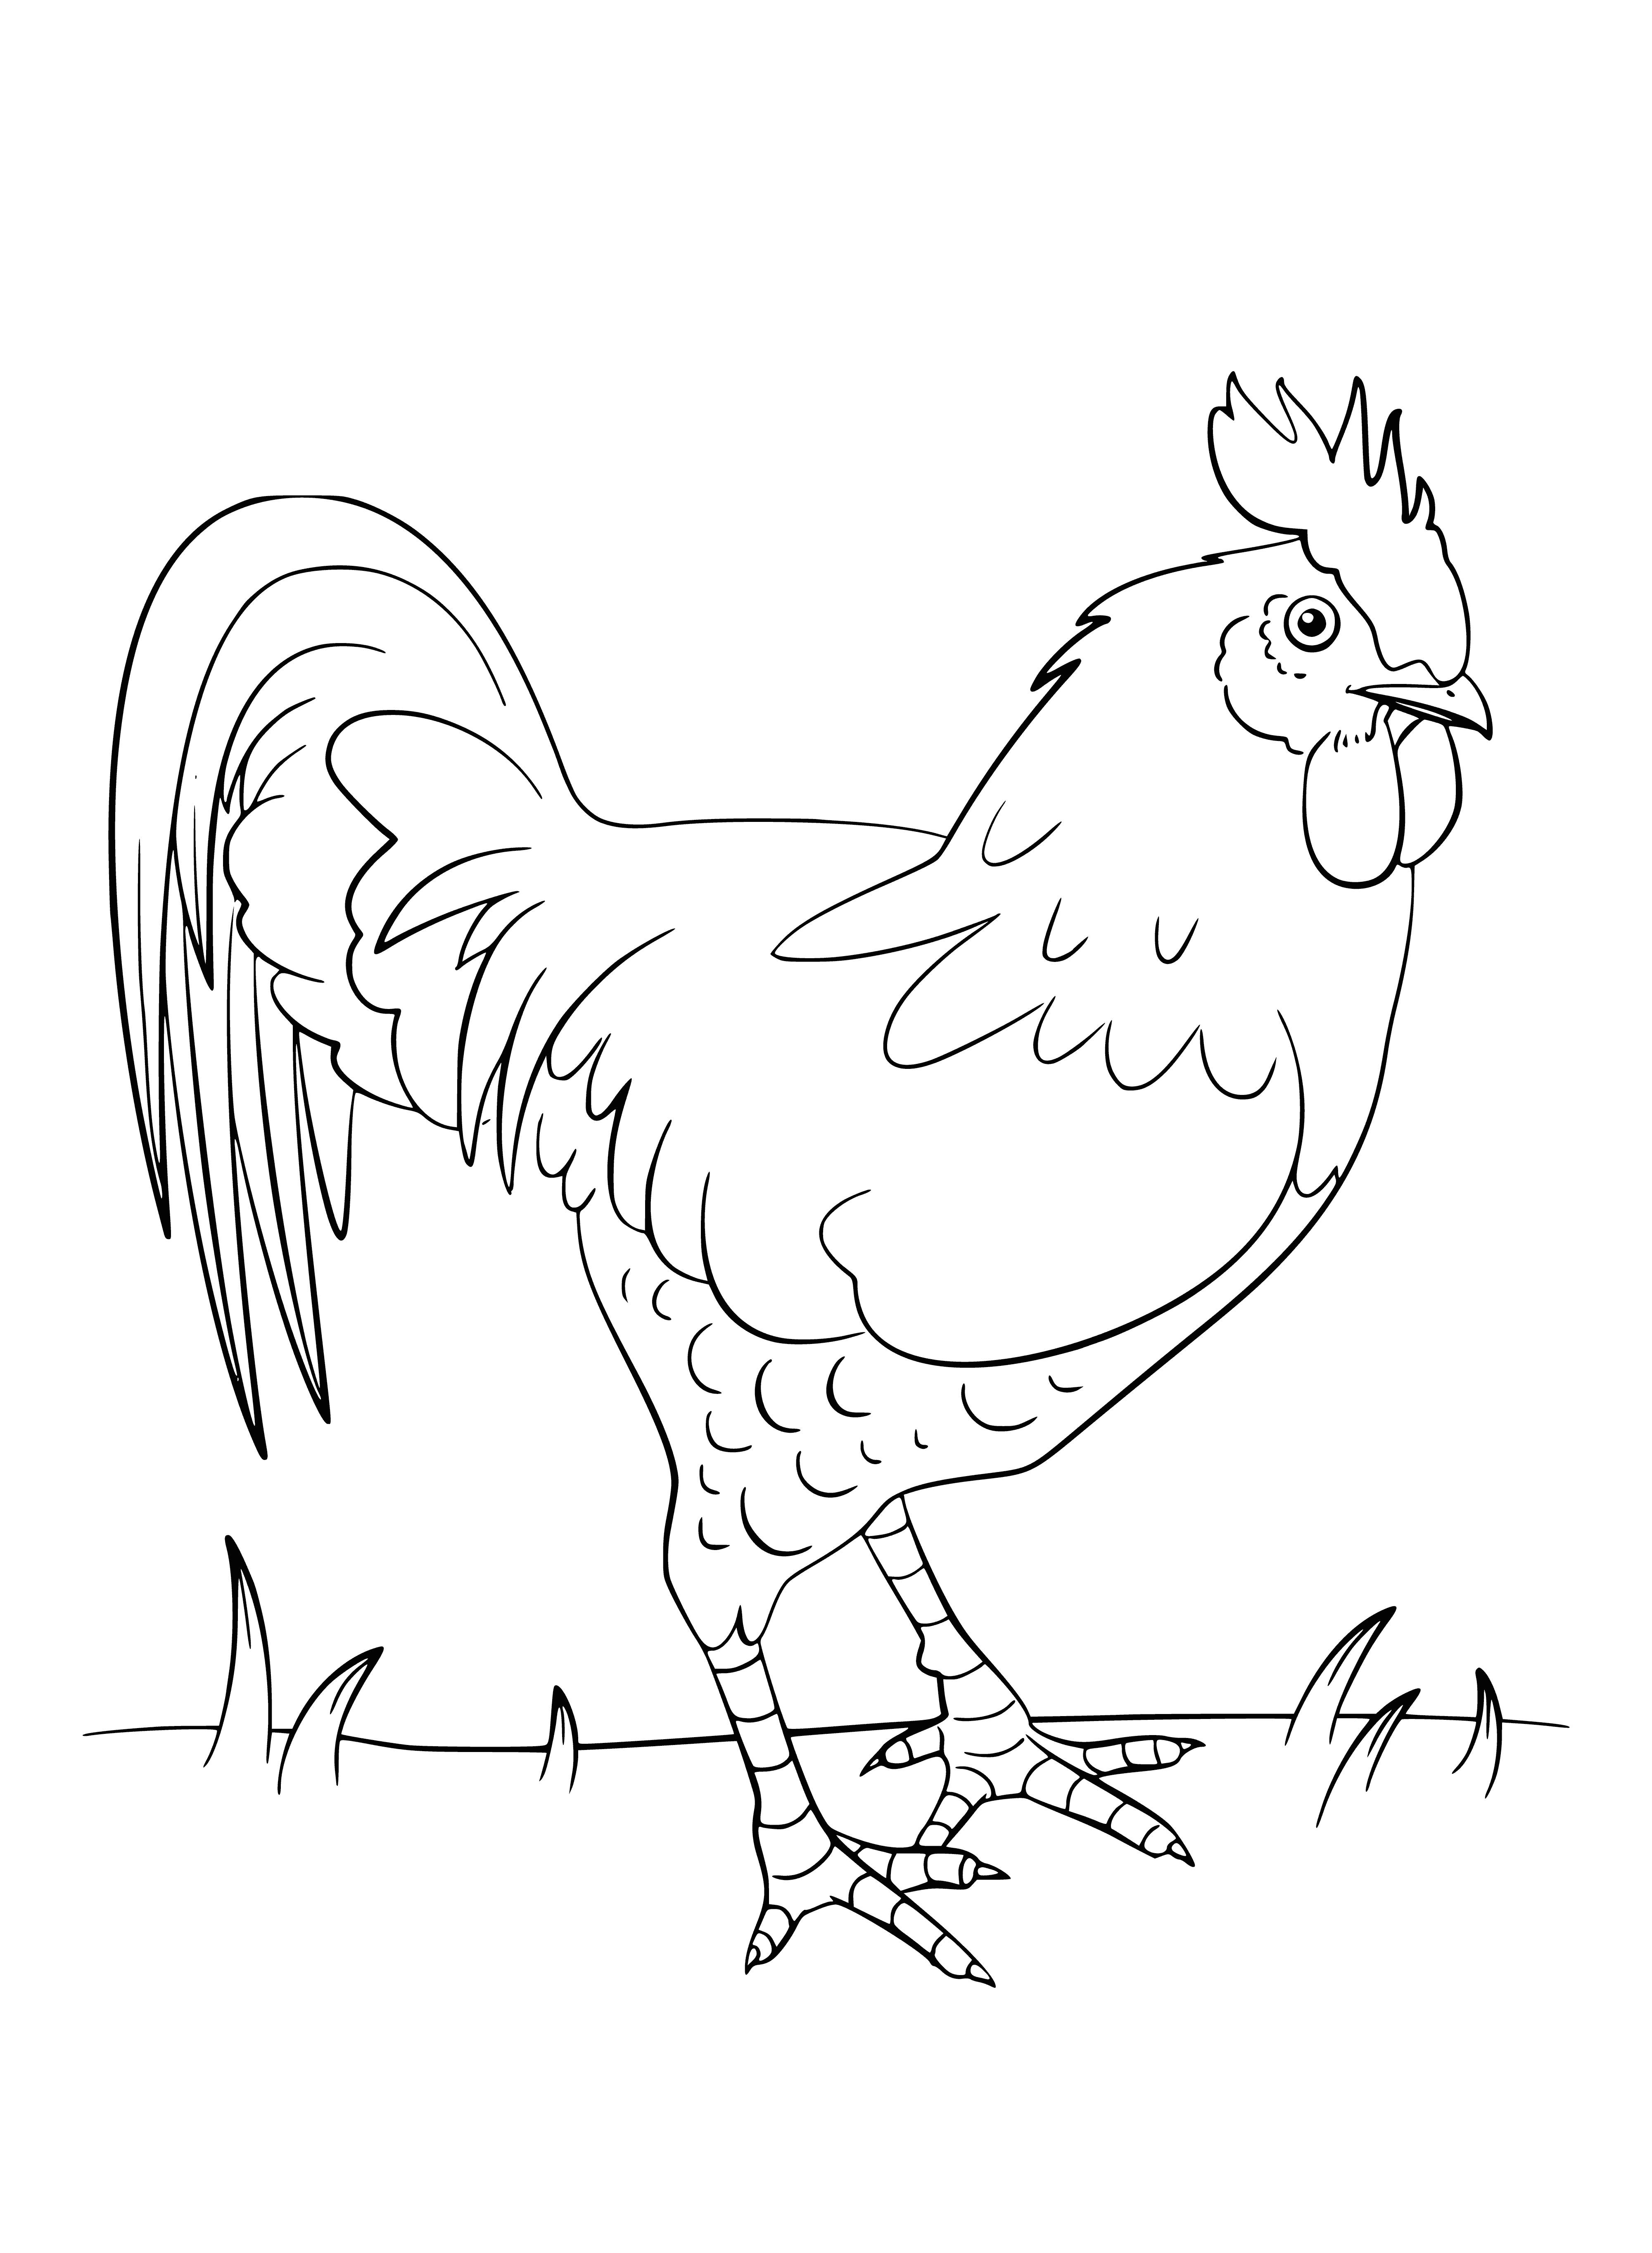 coloring page: Male chicken with loud crow and fighting ability; identifiable by larger size, comb and wattles.